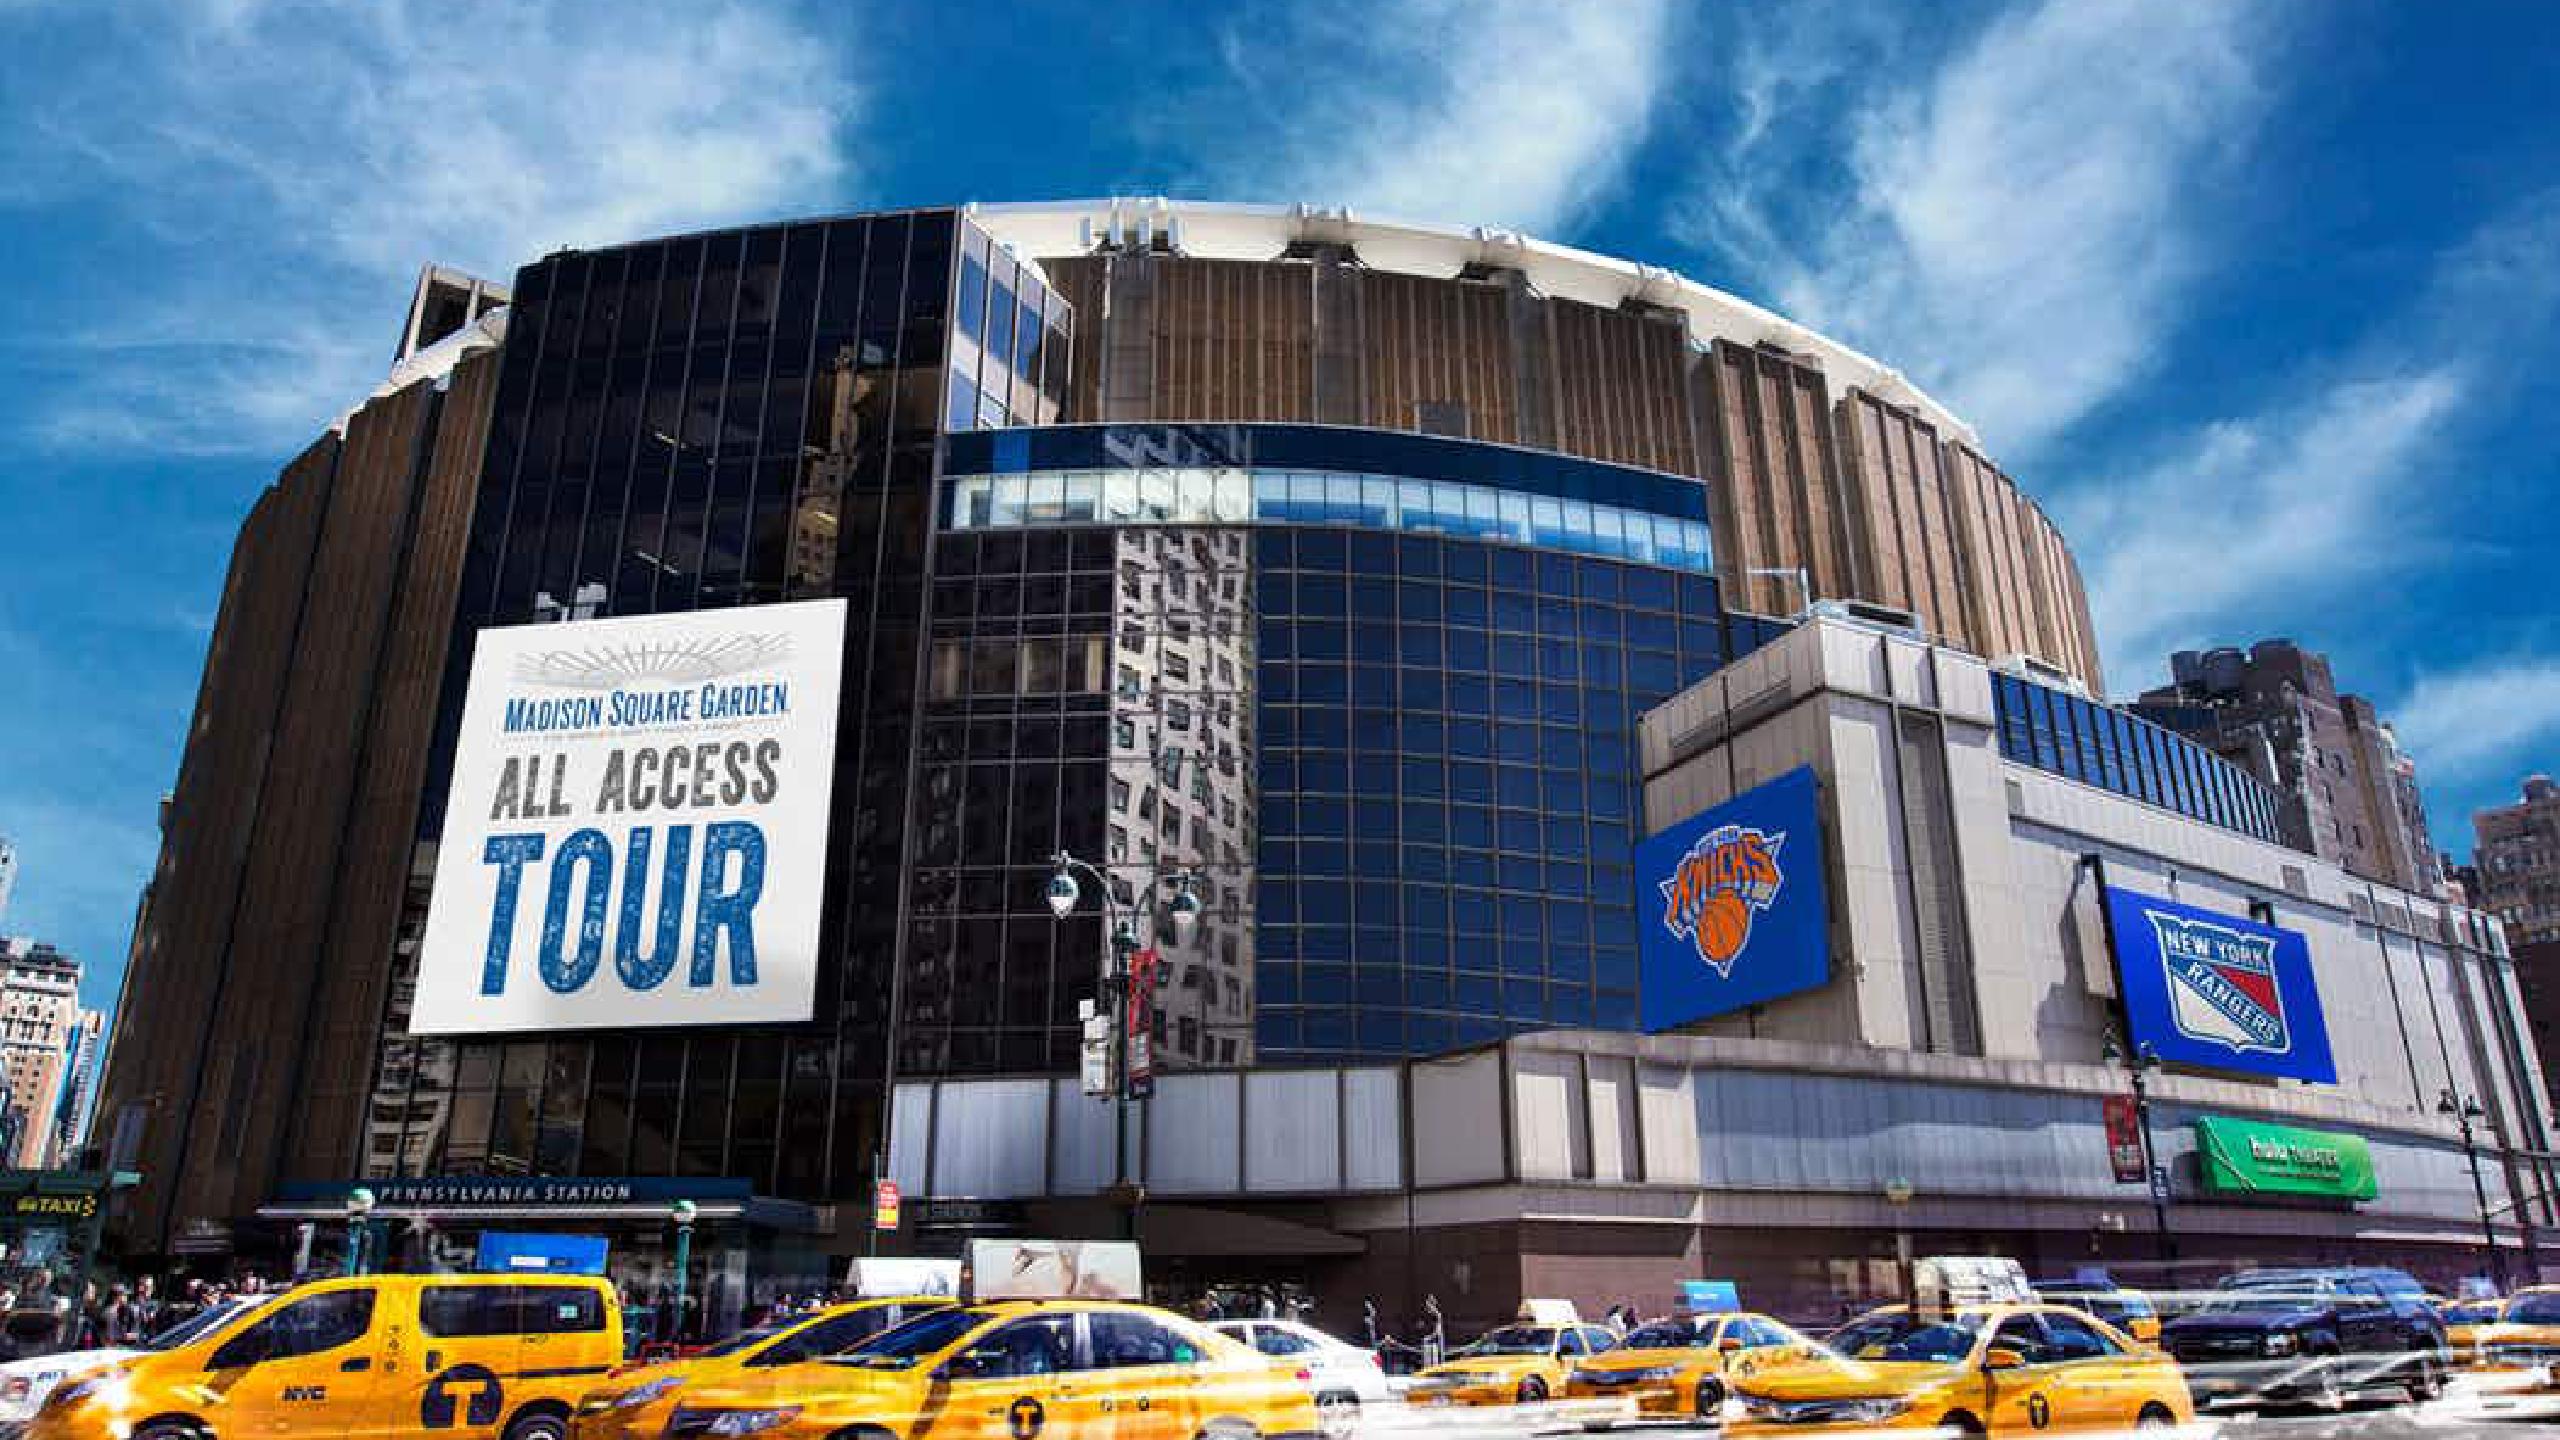 Madison Square Garden Schedule 2022 Madison Square Garden Tickets And Concerts 2022 2023 | Wegow Great Britain